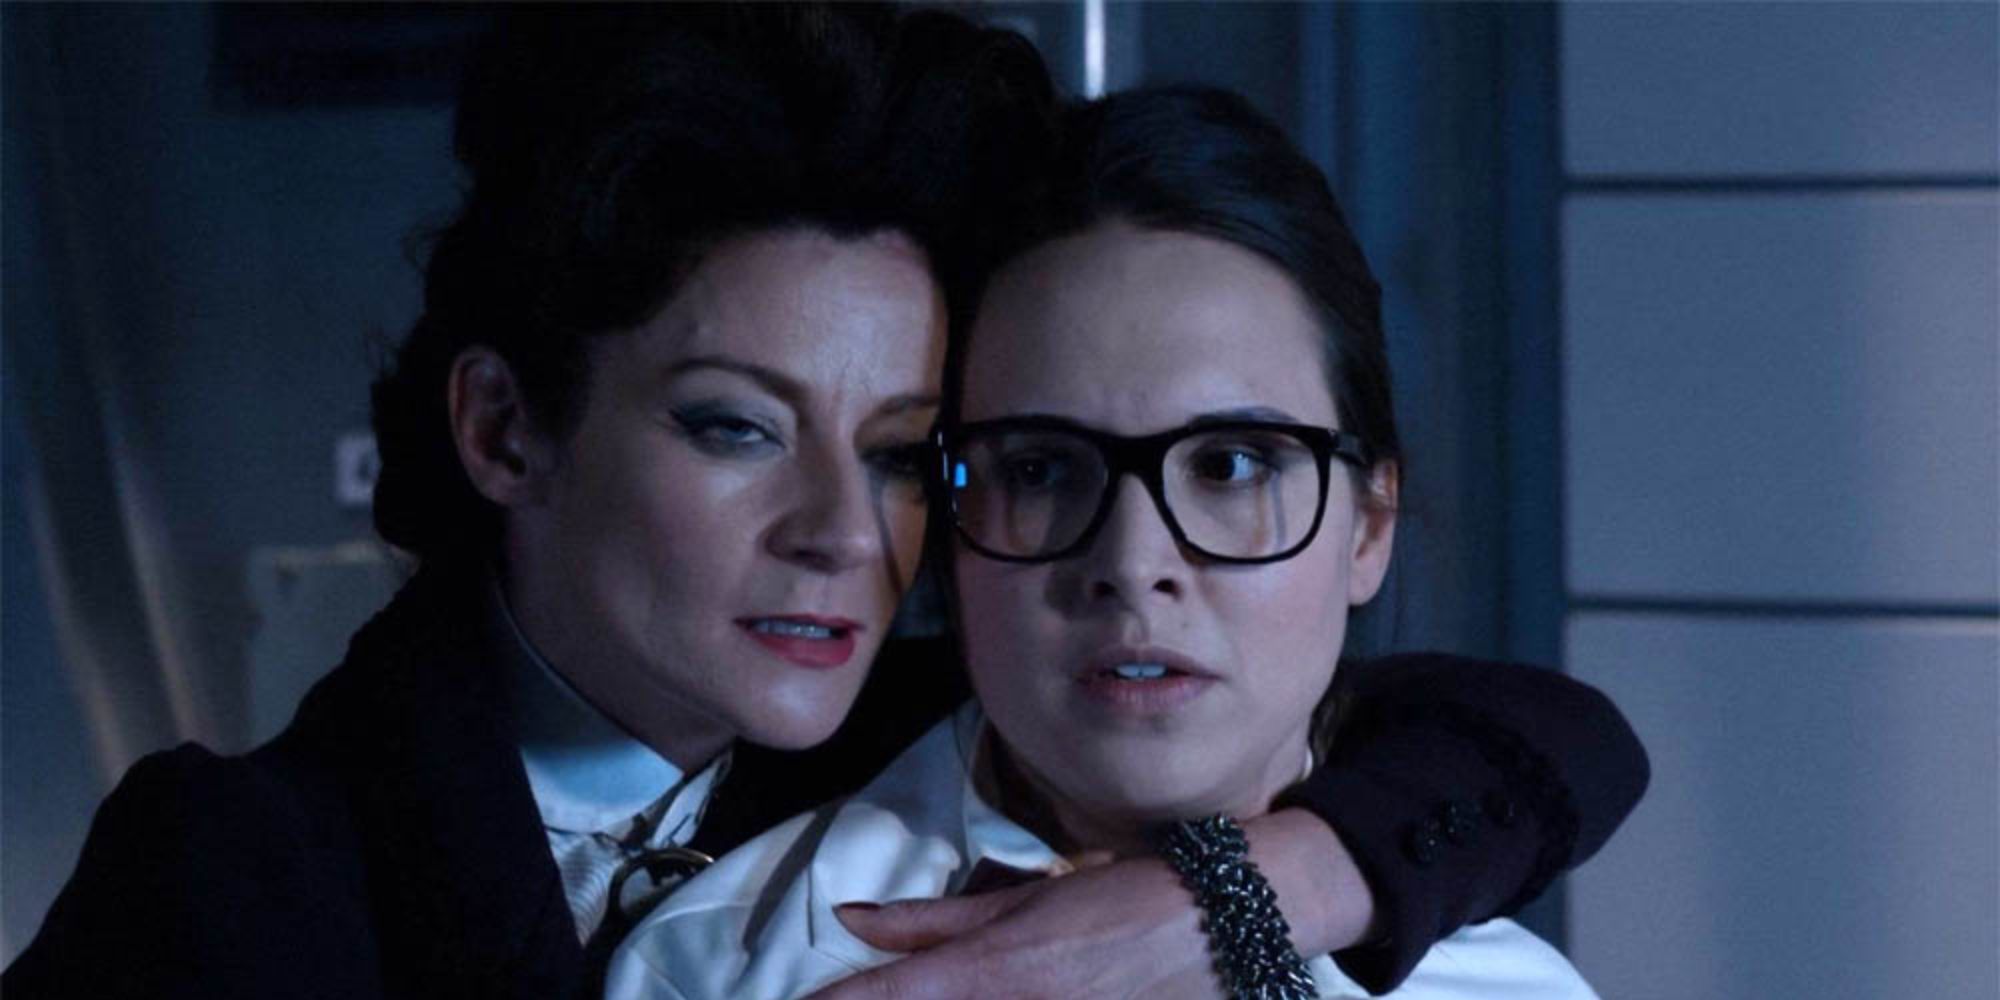 Missy taunts Osgood in Doctor Who